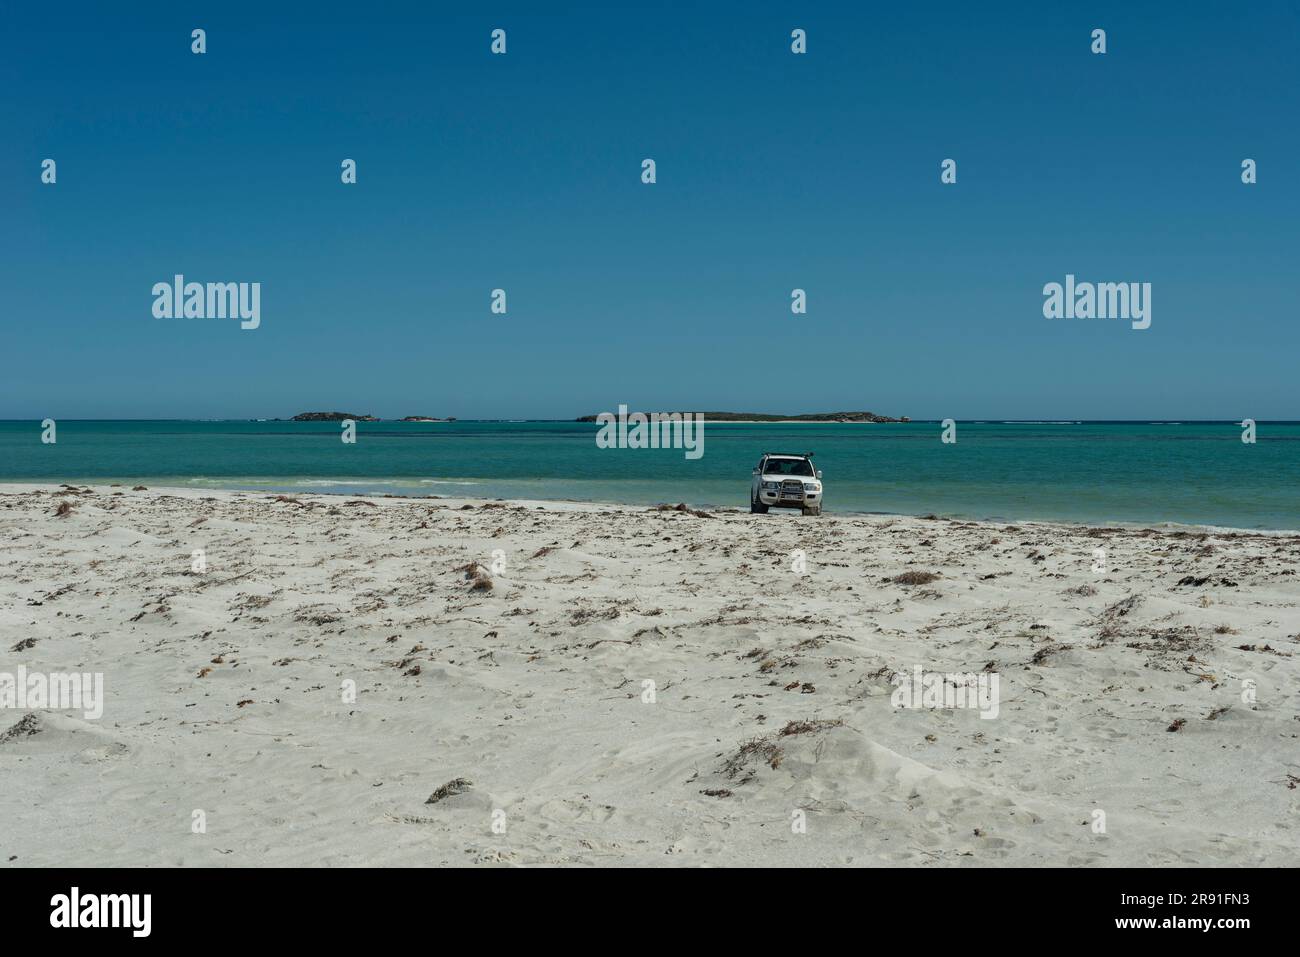 A 4wd drive vehicle is parked on the beach with the sea in the background in Western Australia Stock Photo